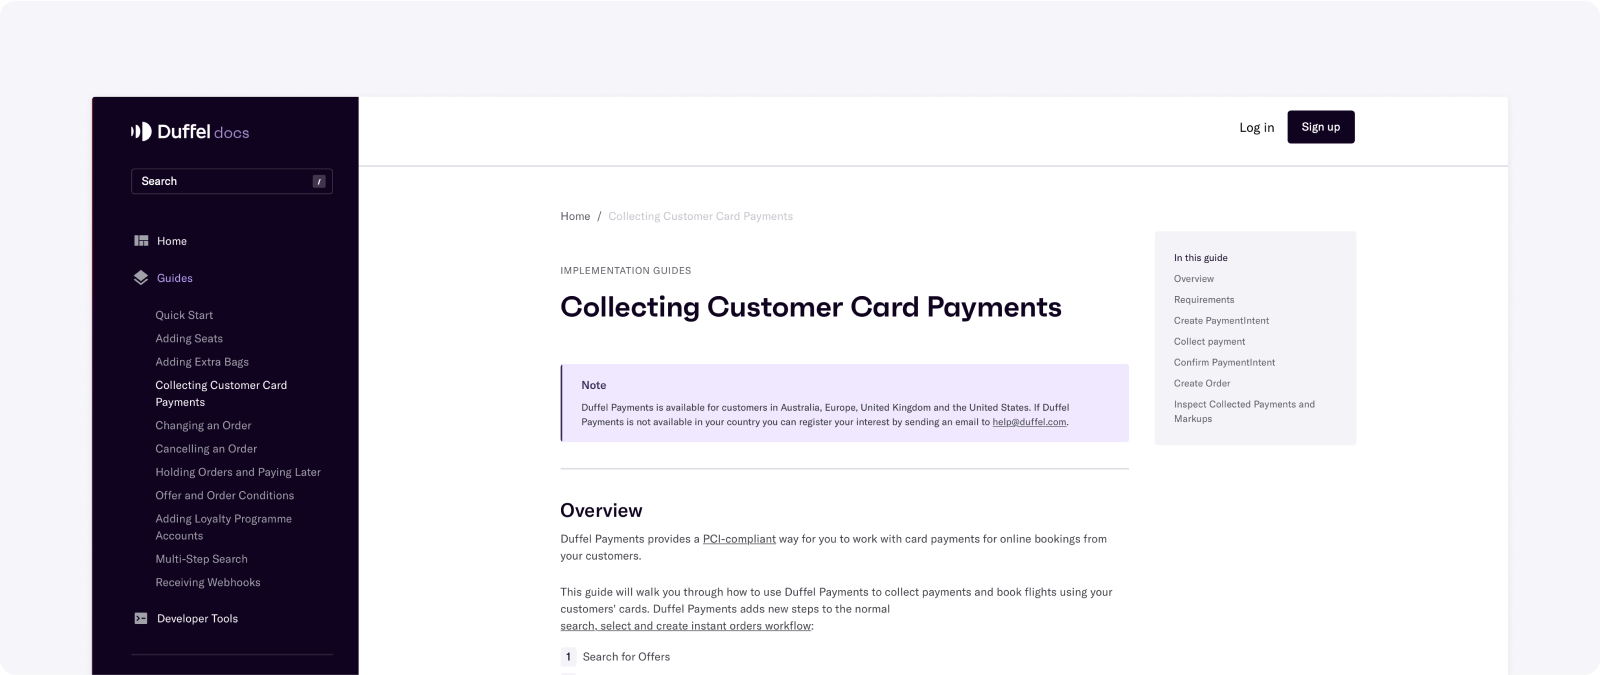 Partial screenshot of the Duffel documentation showing the "collecting customer card payments" guide